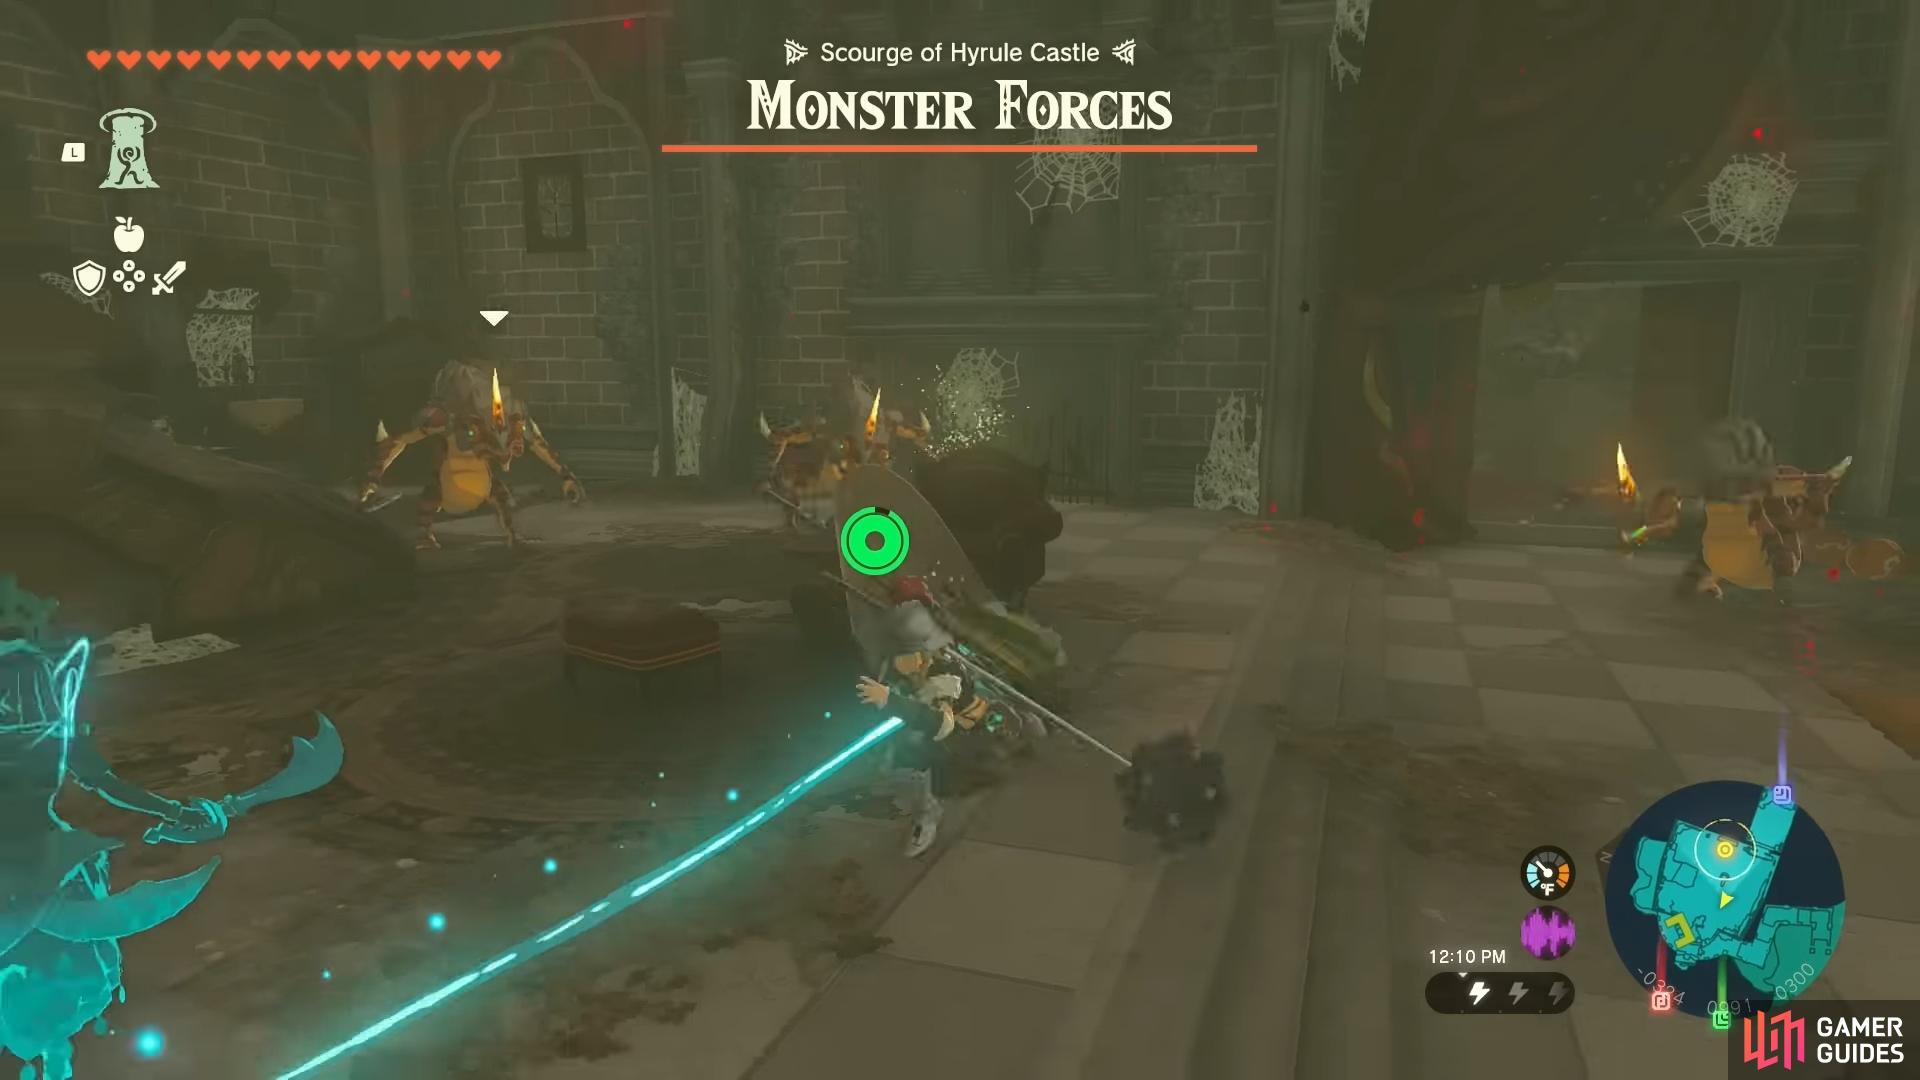 The fourth !Hyrule Castle Monster Forces battle containing Fire Breath !Lizalfos